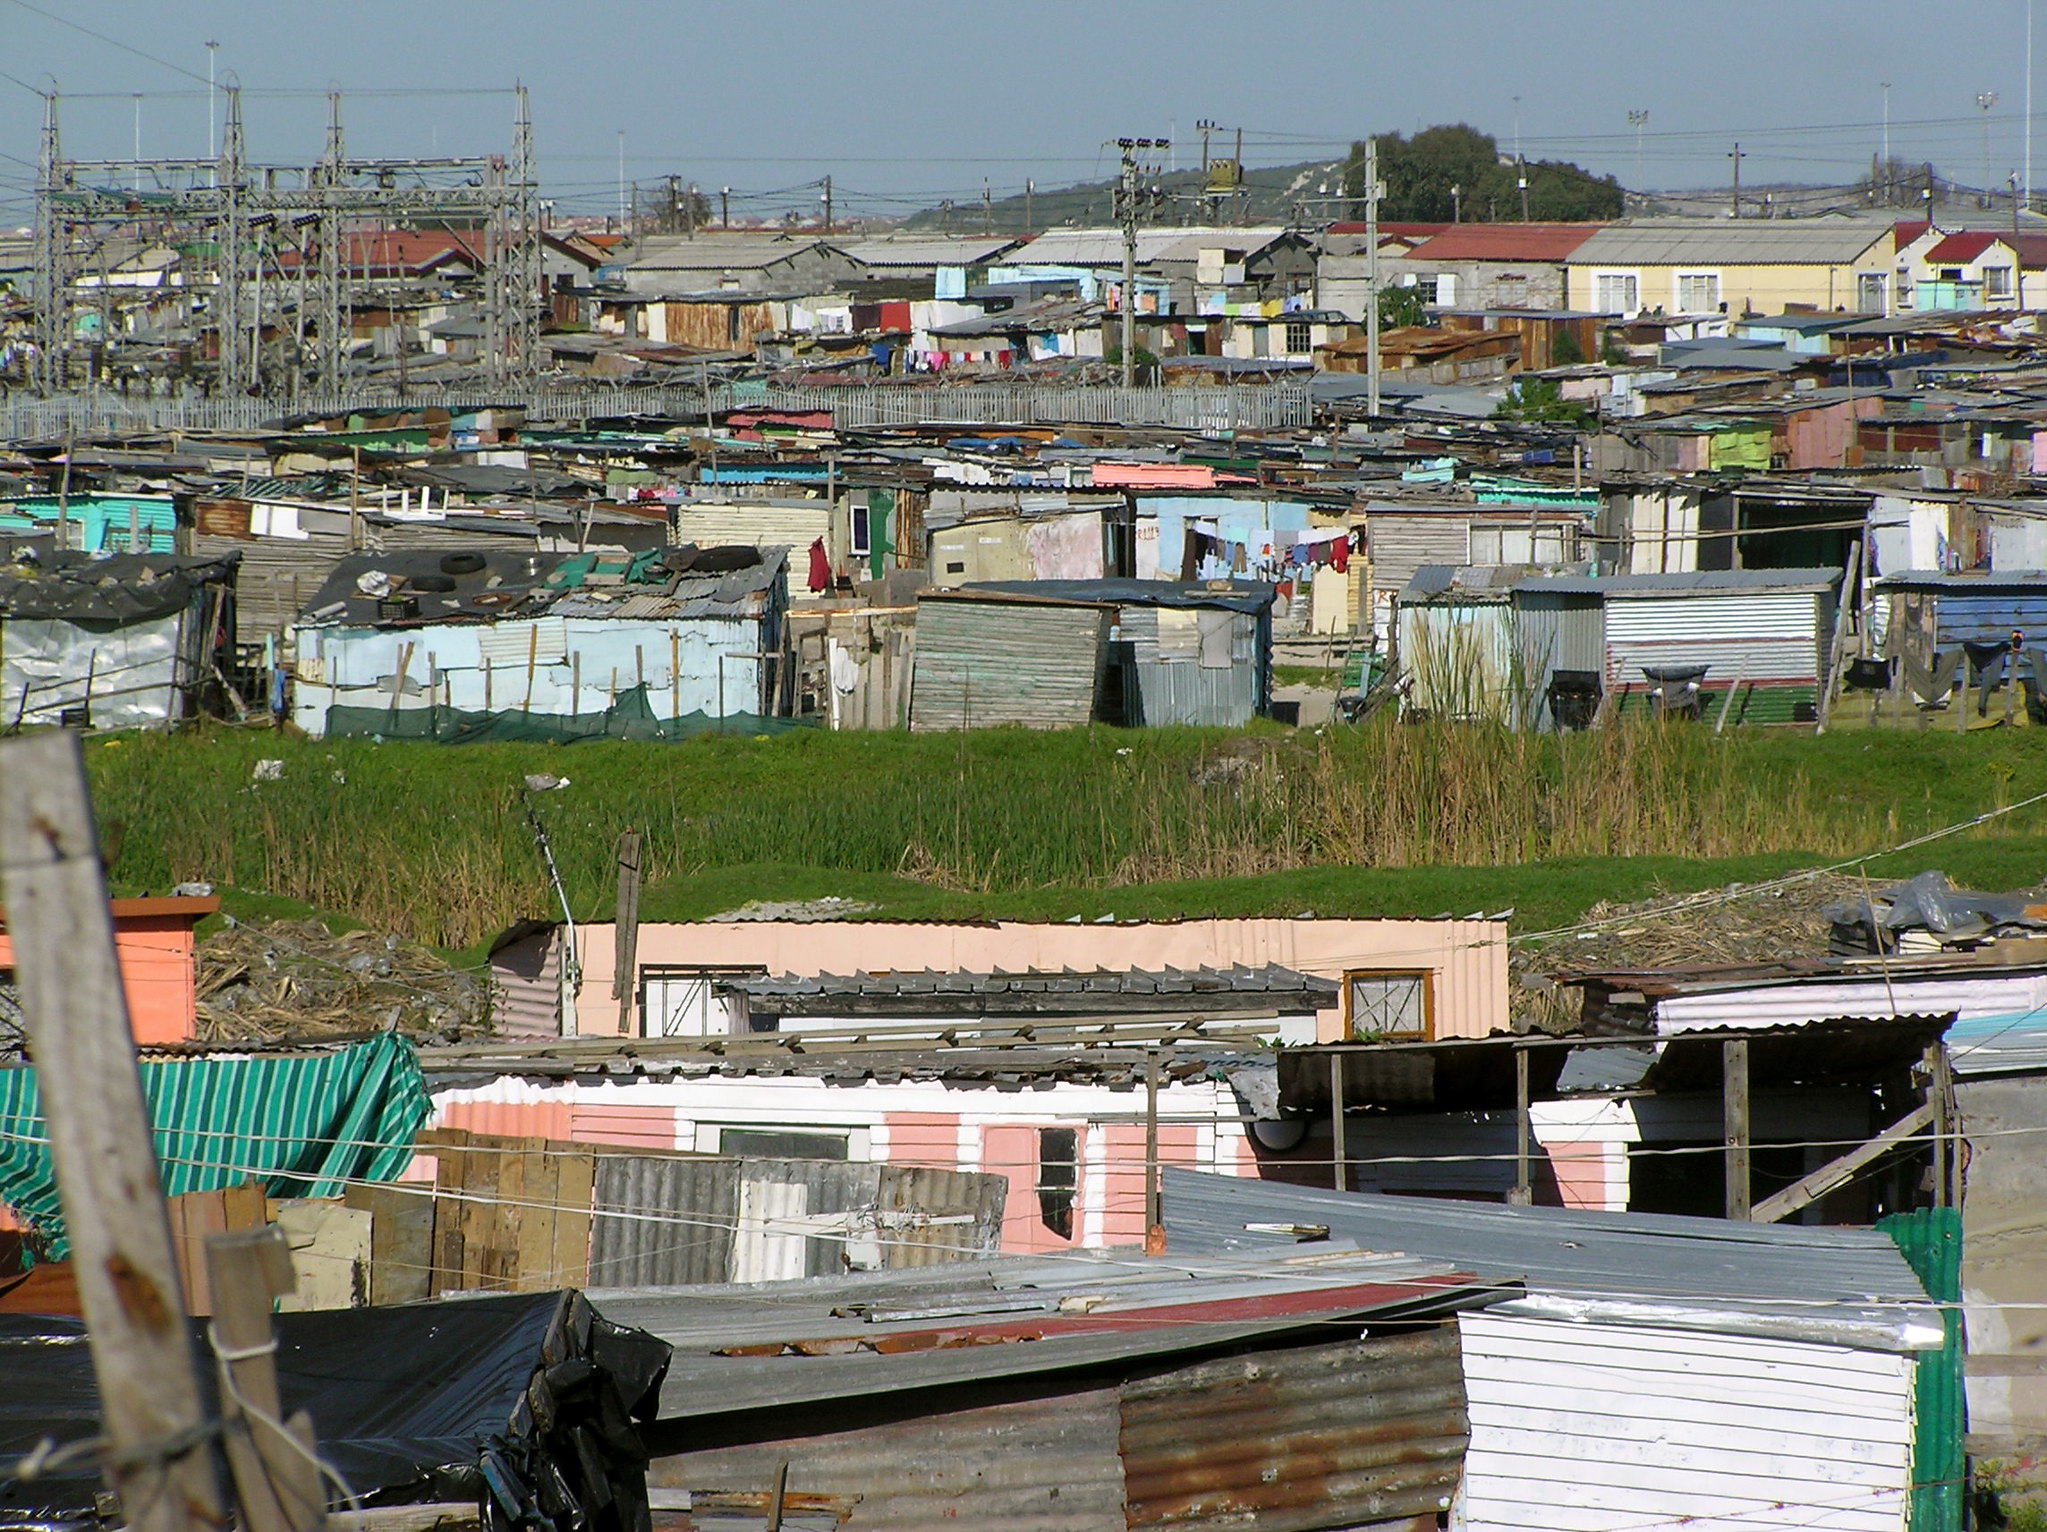 The disproportionate response to Covid-19 in informal urban settlements